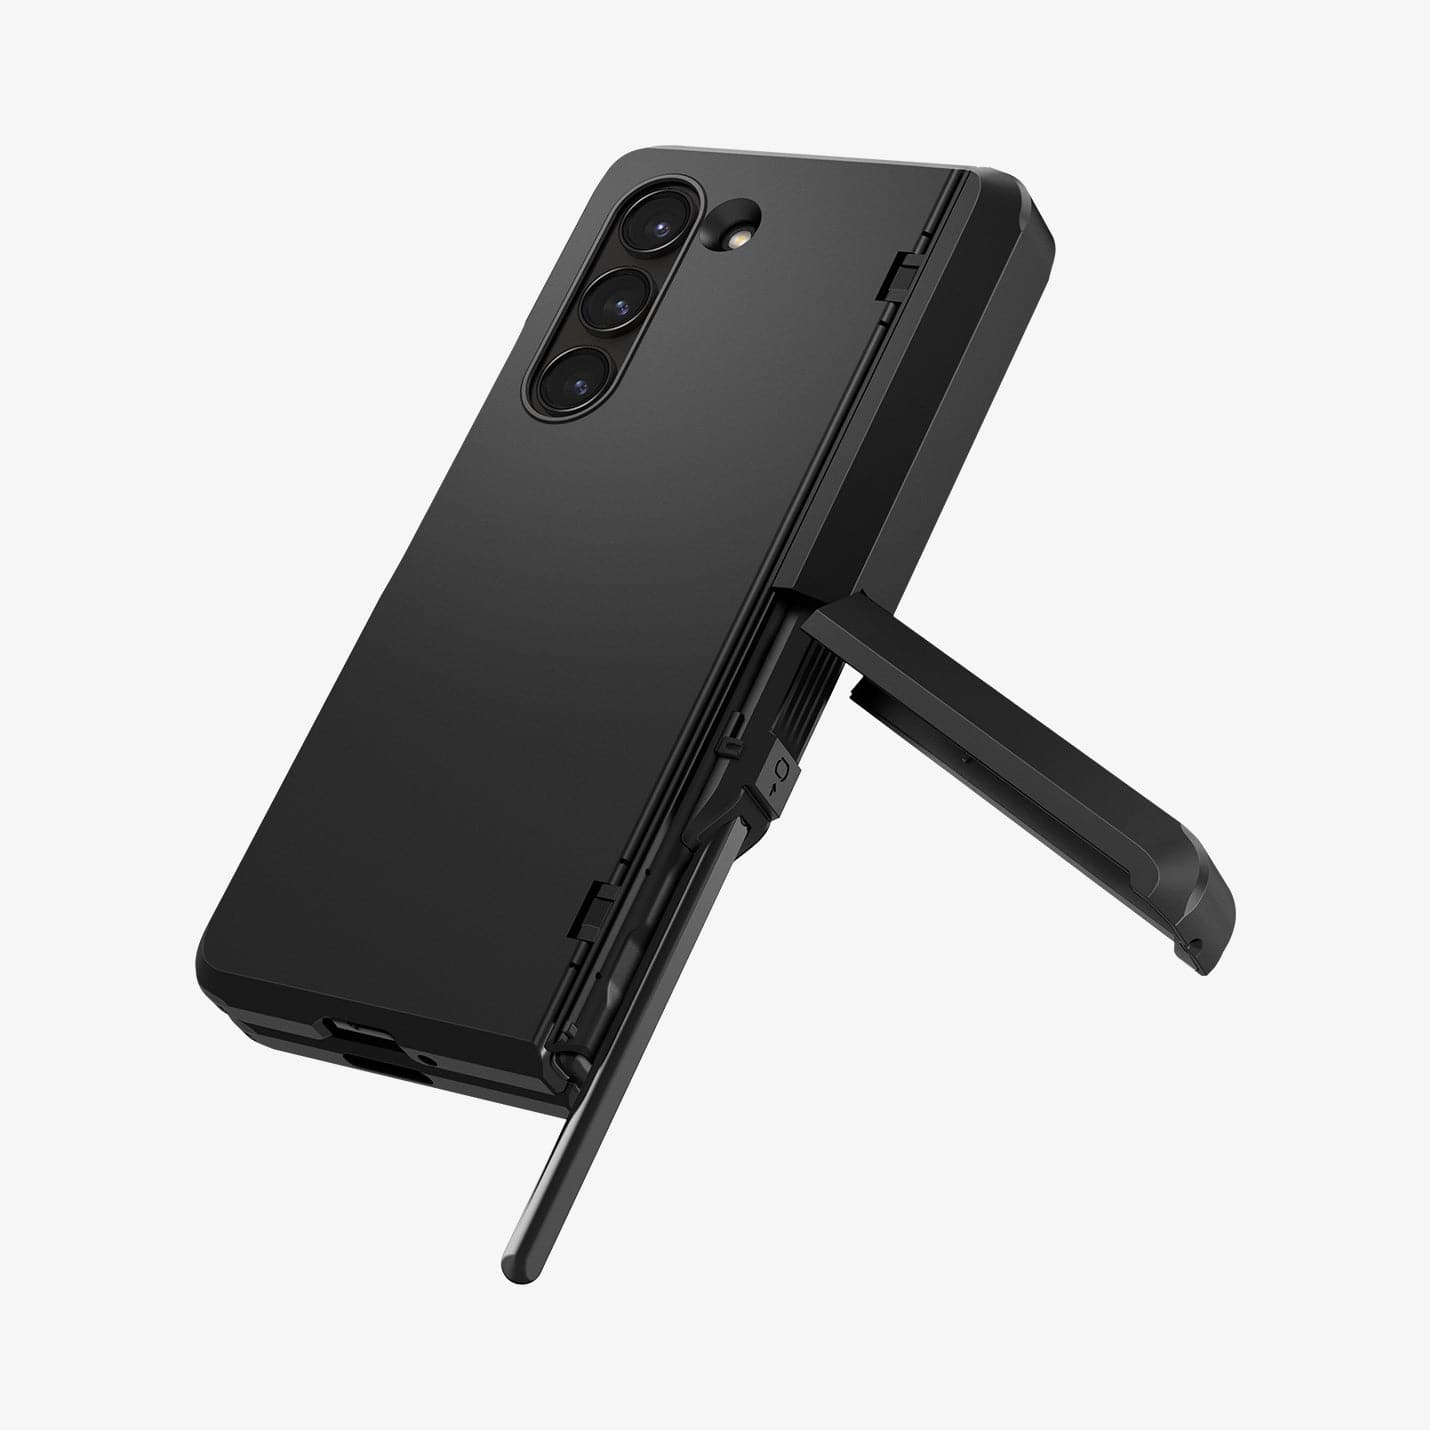 ACS06214 - Galaxy Z Fold 5 Case Tough Armor Pro P in black showing the back with kickstand extended out and pen sticking out of slot